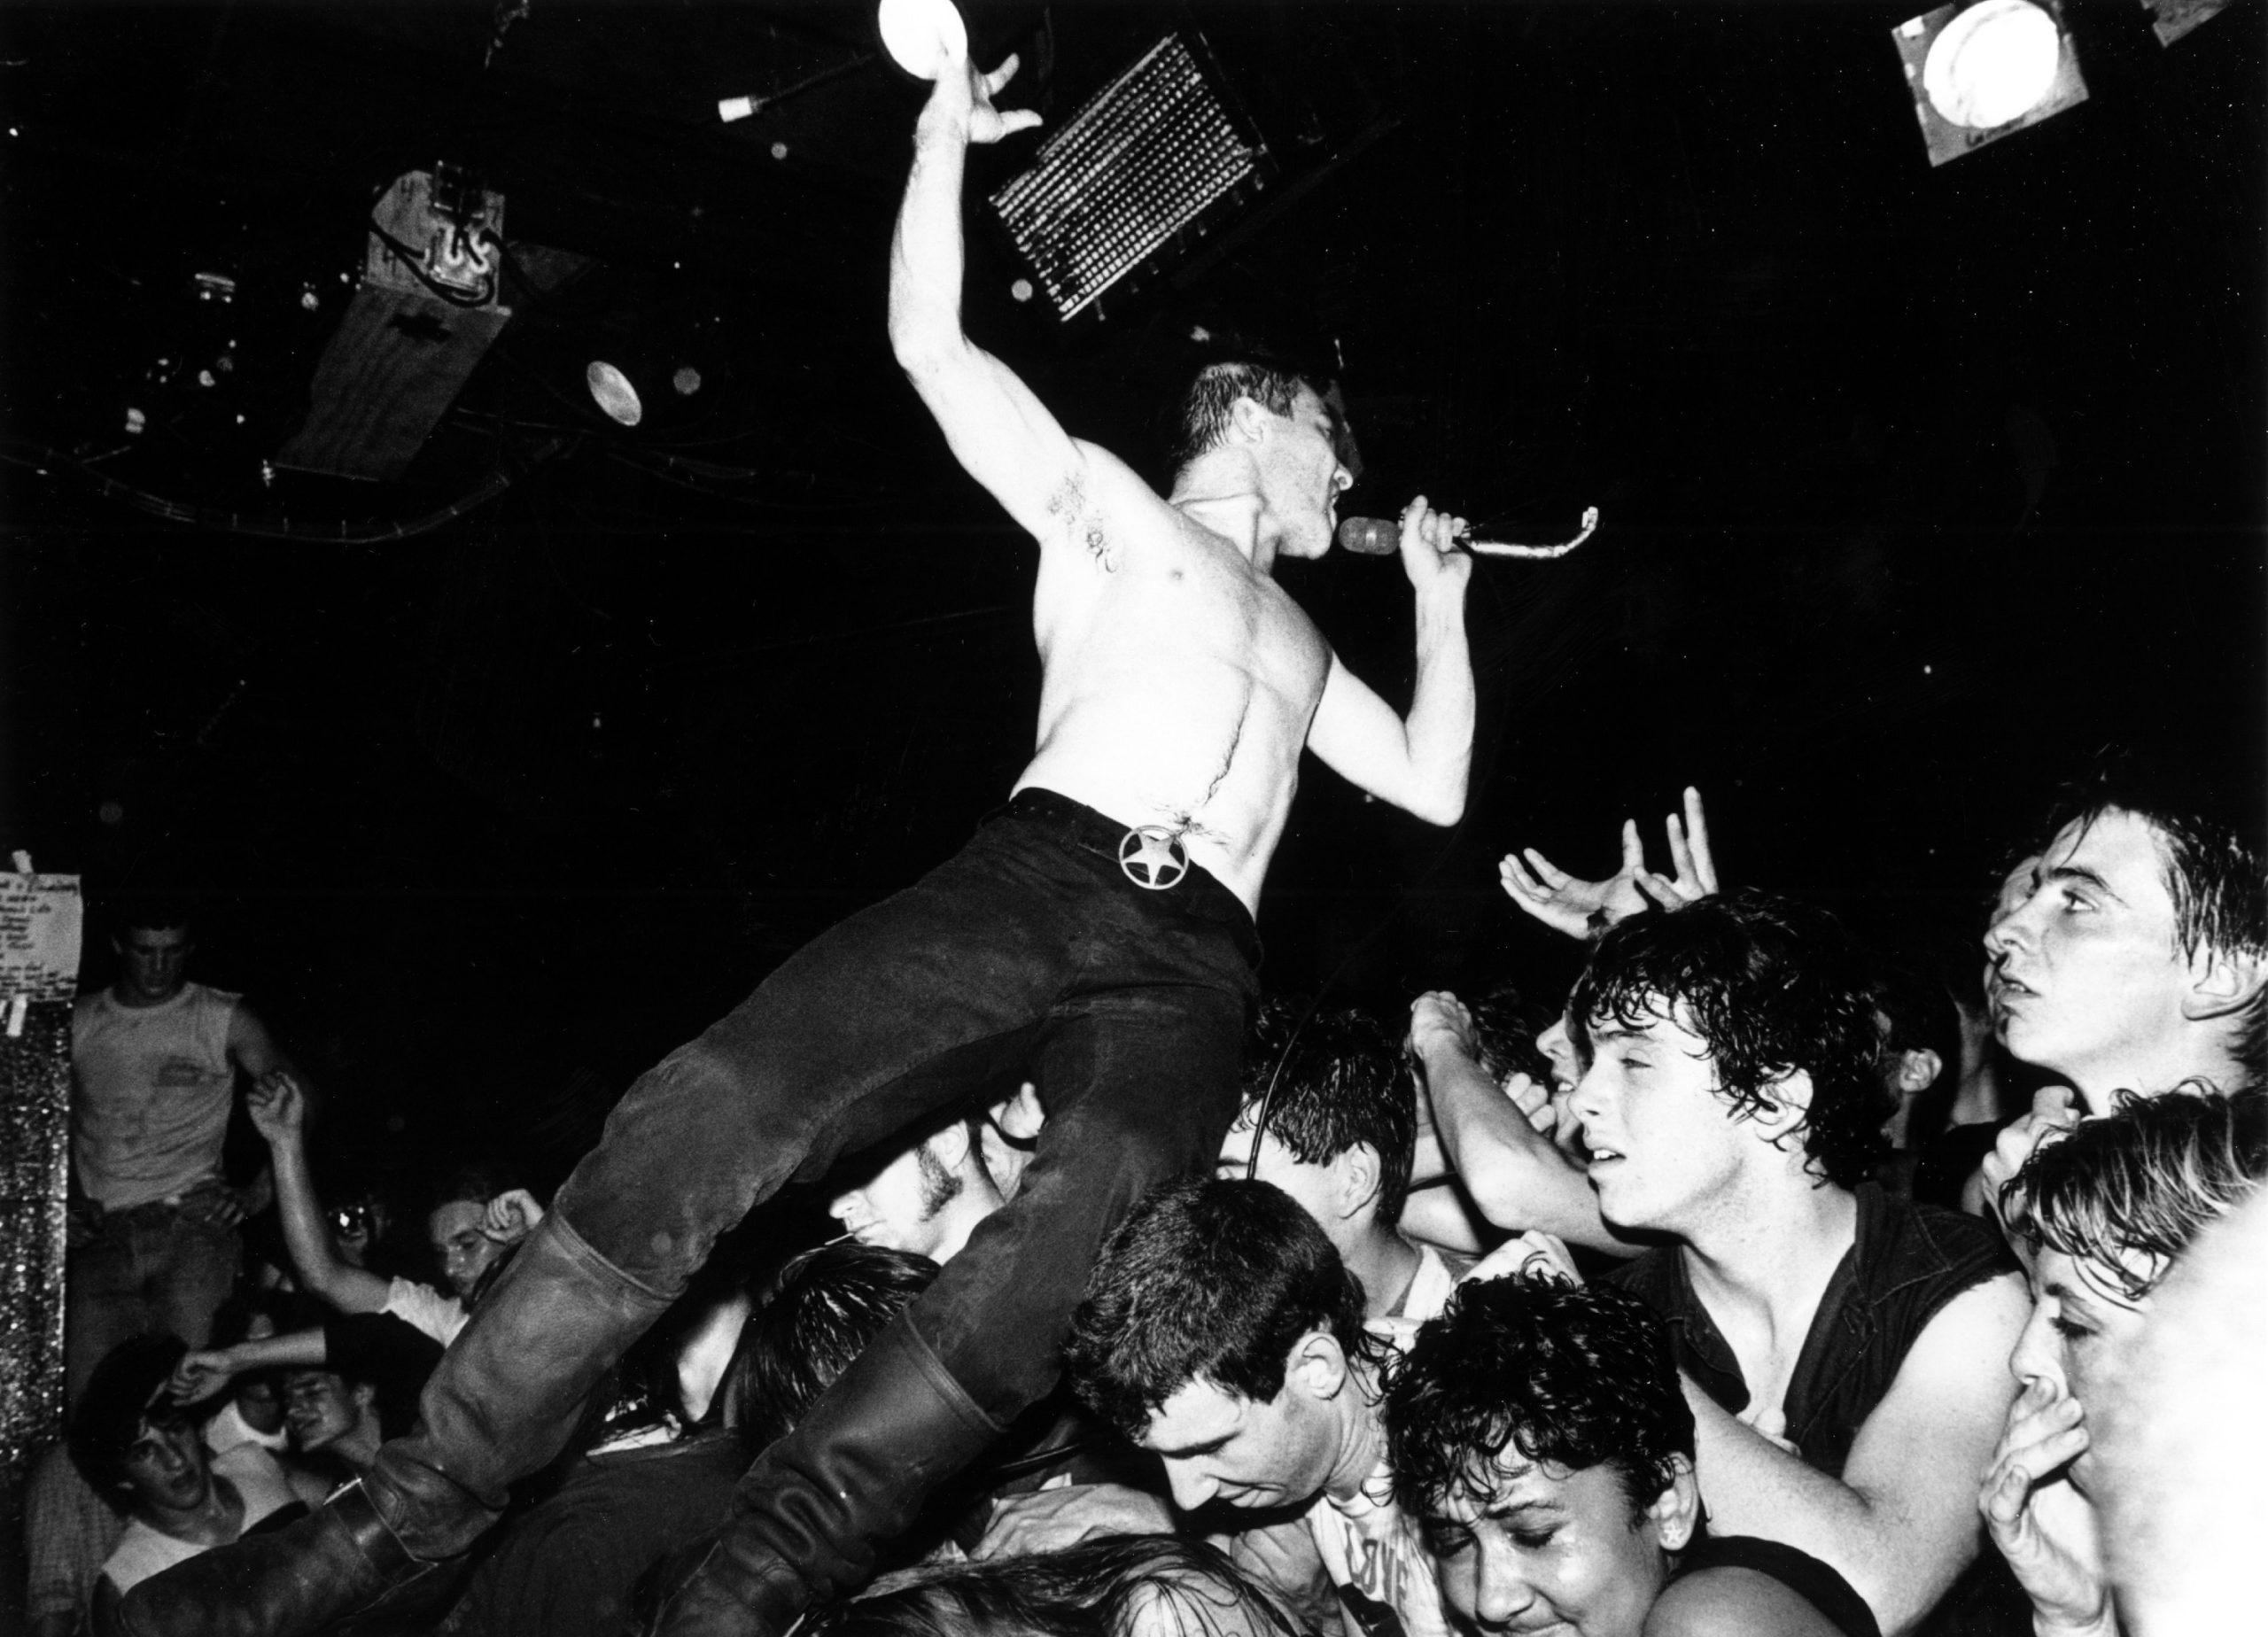 UNSPECIFIED - CIRCA 1980:  Photo of Dead Kennedys  (Photo by Anne Fishbein/Michael Ochs Archives/Getty Images)